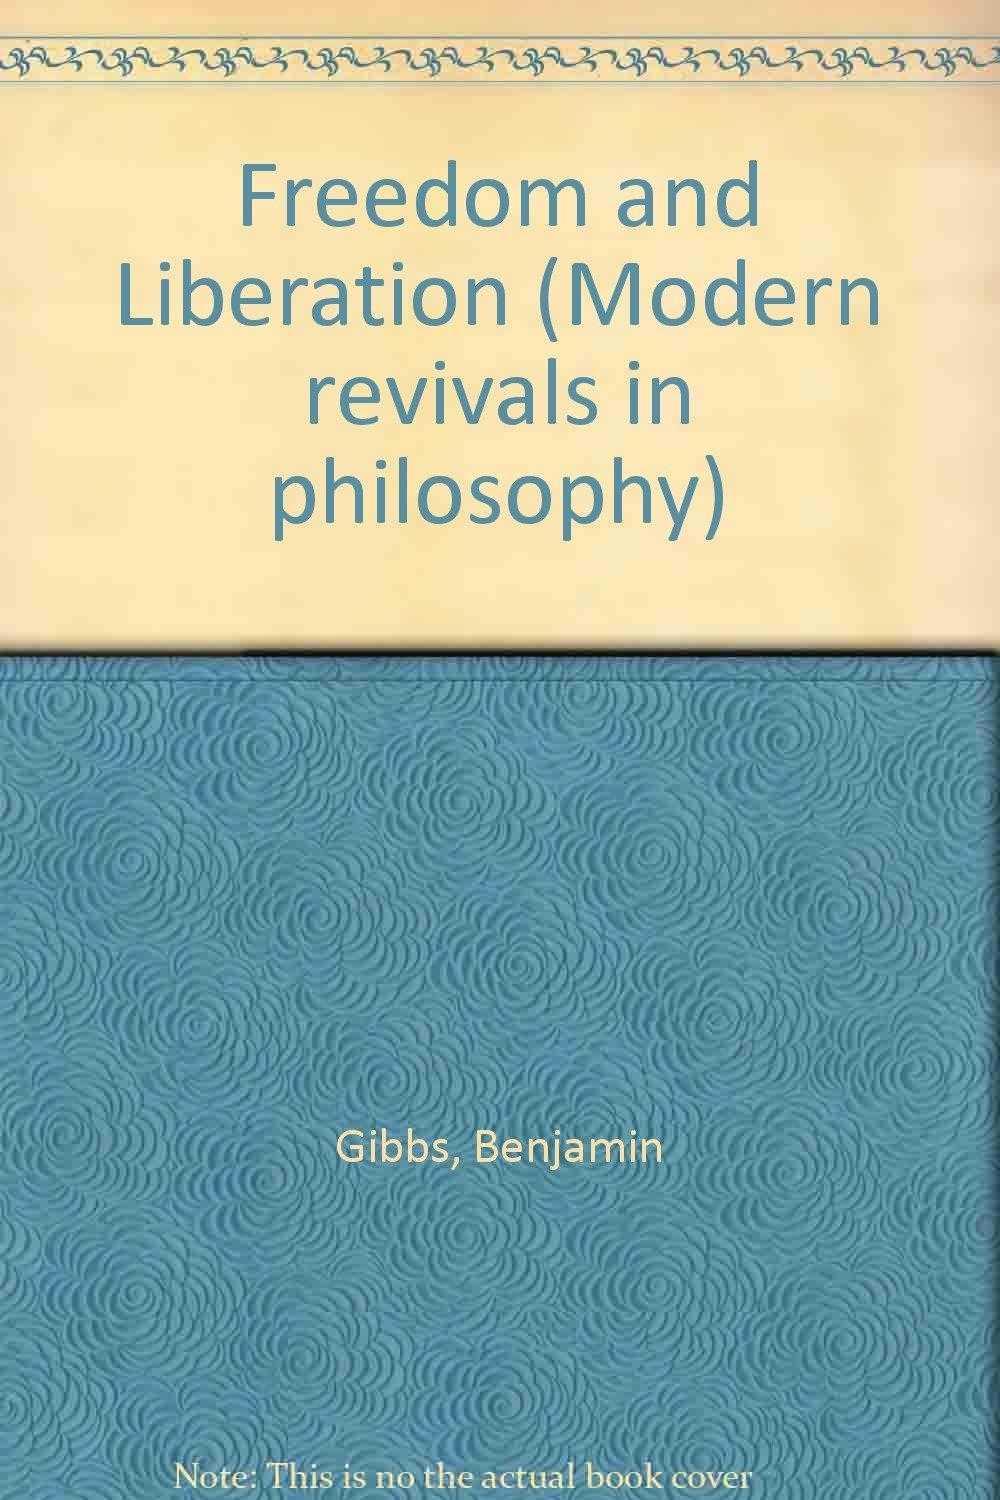 Freedom and Liberation (Modern revivals in philosophy) - Gibbs, Benjamin